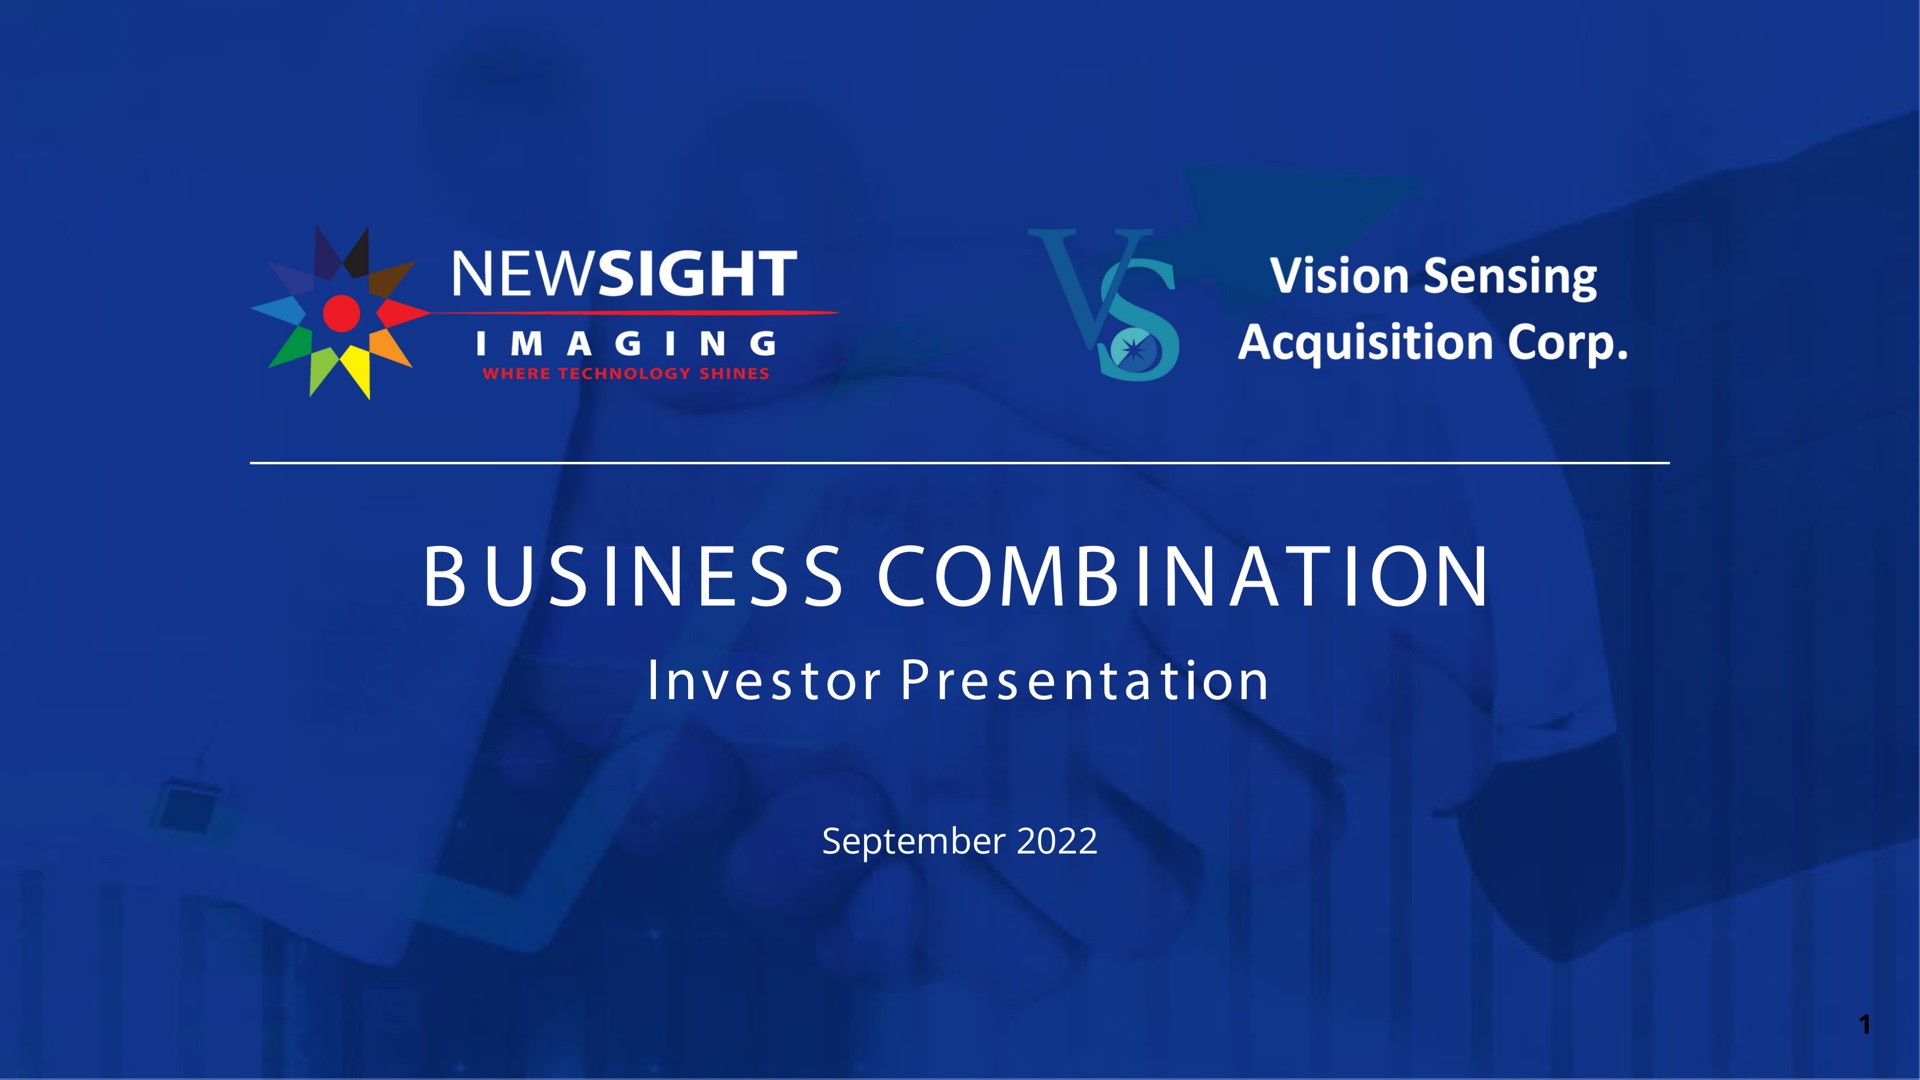 us comb ion tor imaging vision sensing acquisition corp business combination investor presentation | Newsight Imaging